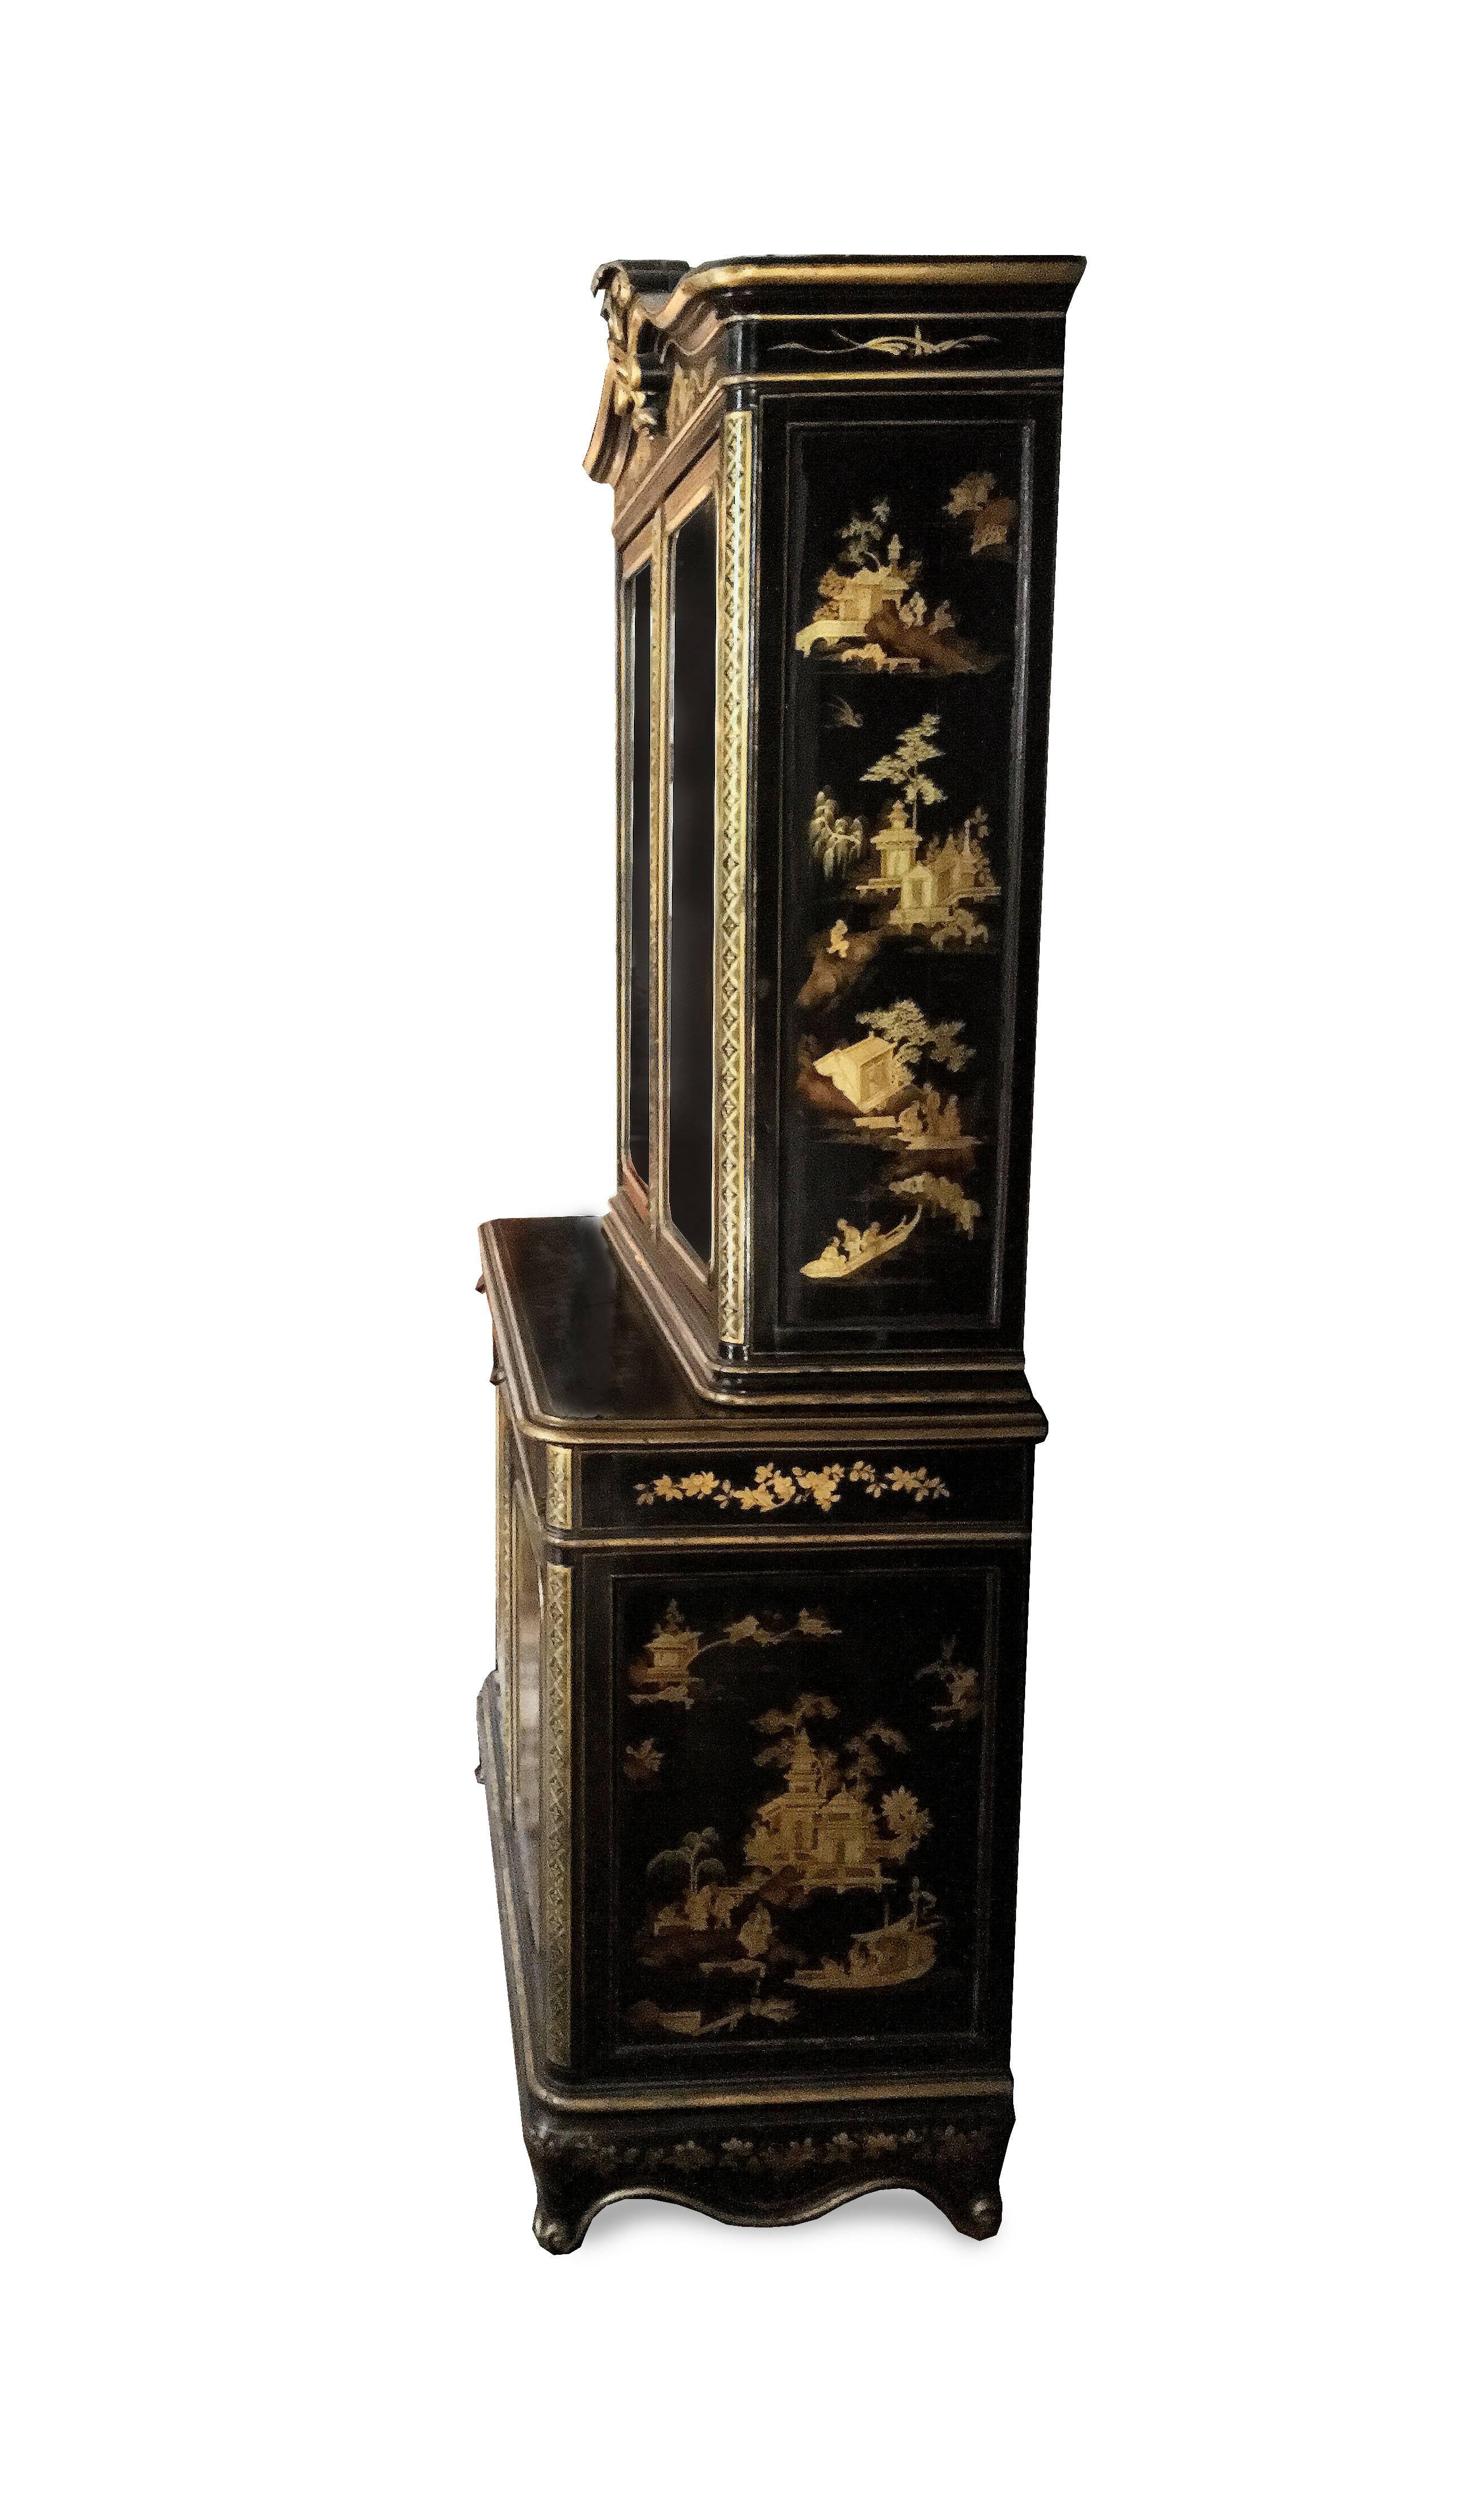 A magnificent lacquered gold and black cabinet covered in exceptionally detailed gilt fretwork and scenery. The glassed upper case features a Baroque scrolled pedimented cornice with volutes and Prince of Wales feathers emerging from a coronet. The